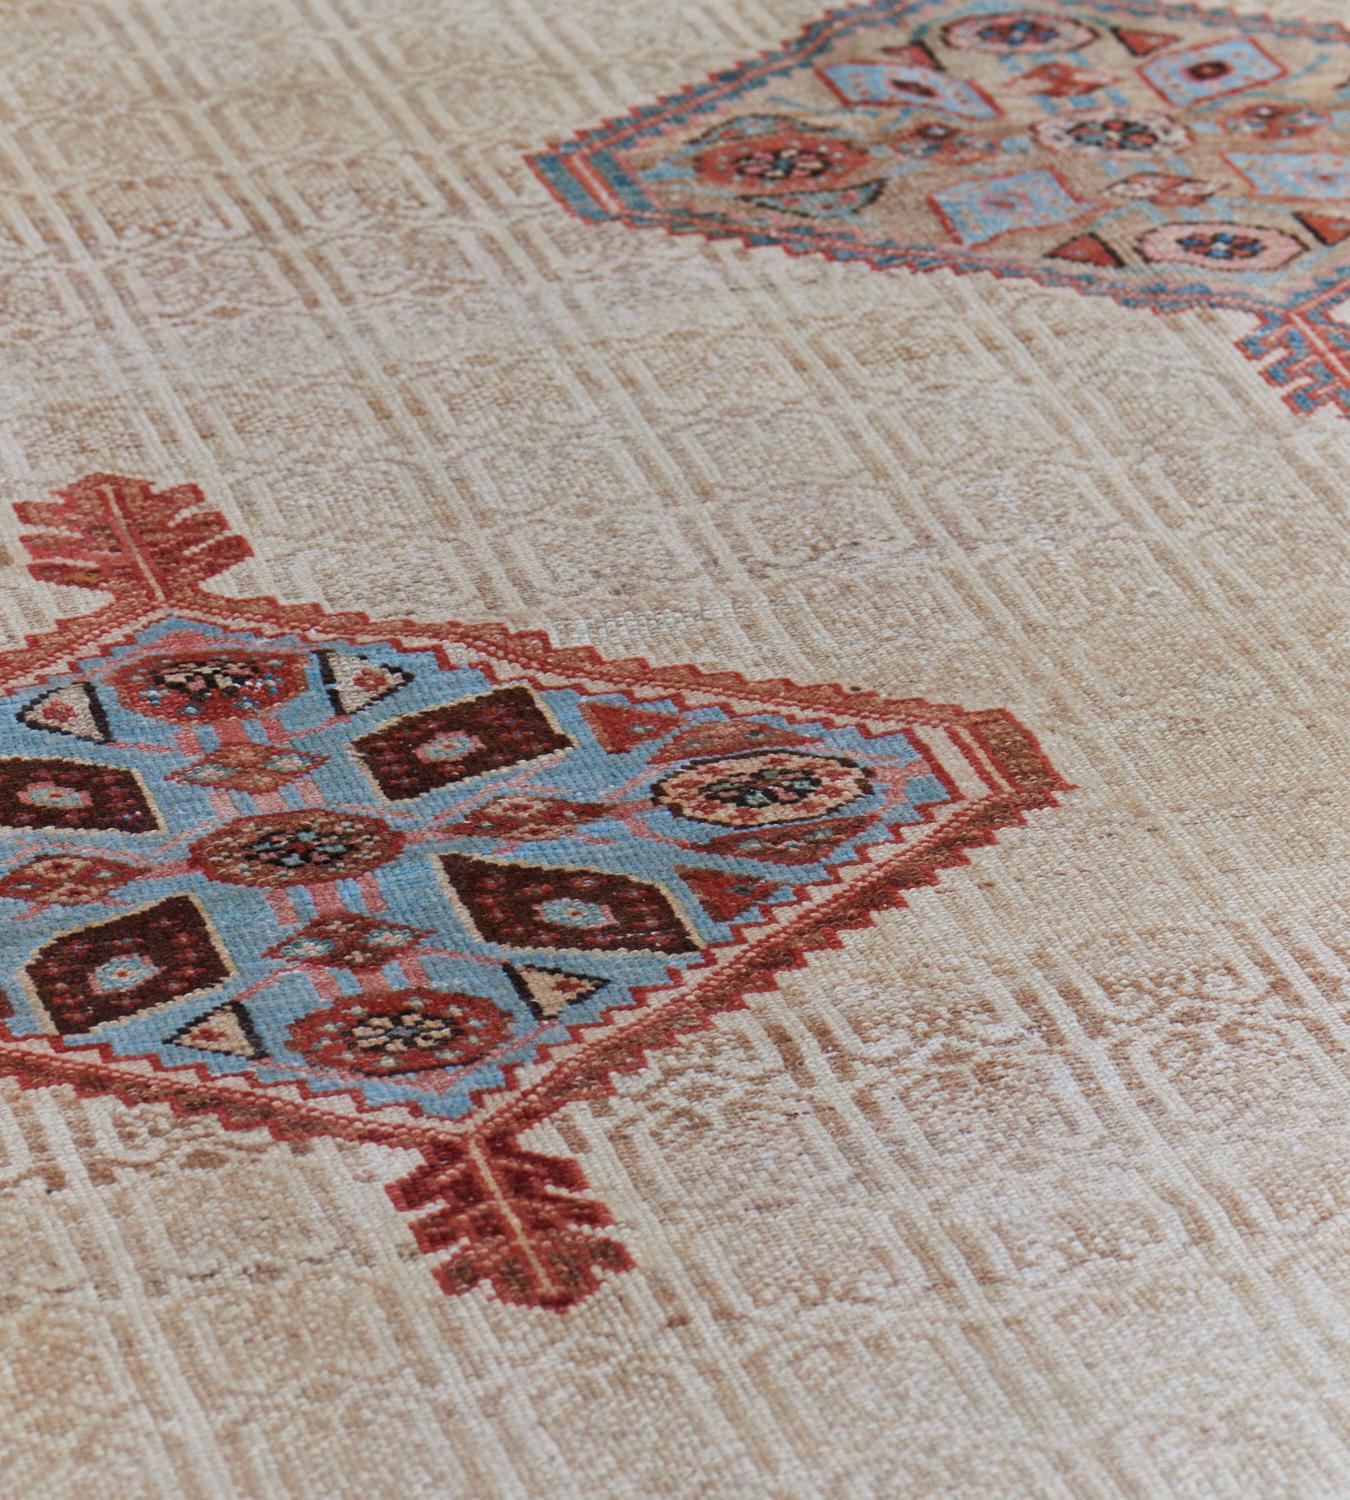 This antique, circa 1890, hand-woven Serab Persian rug has an ivory field with a light brown vertical trellis of linked paired both around diagonal rows of spaced serrated light blue and sandy-brown lozenges and part lozenges with leaf pendants each